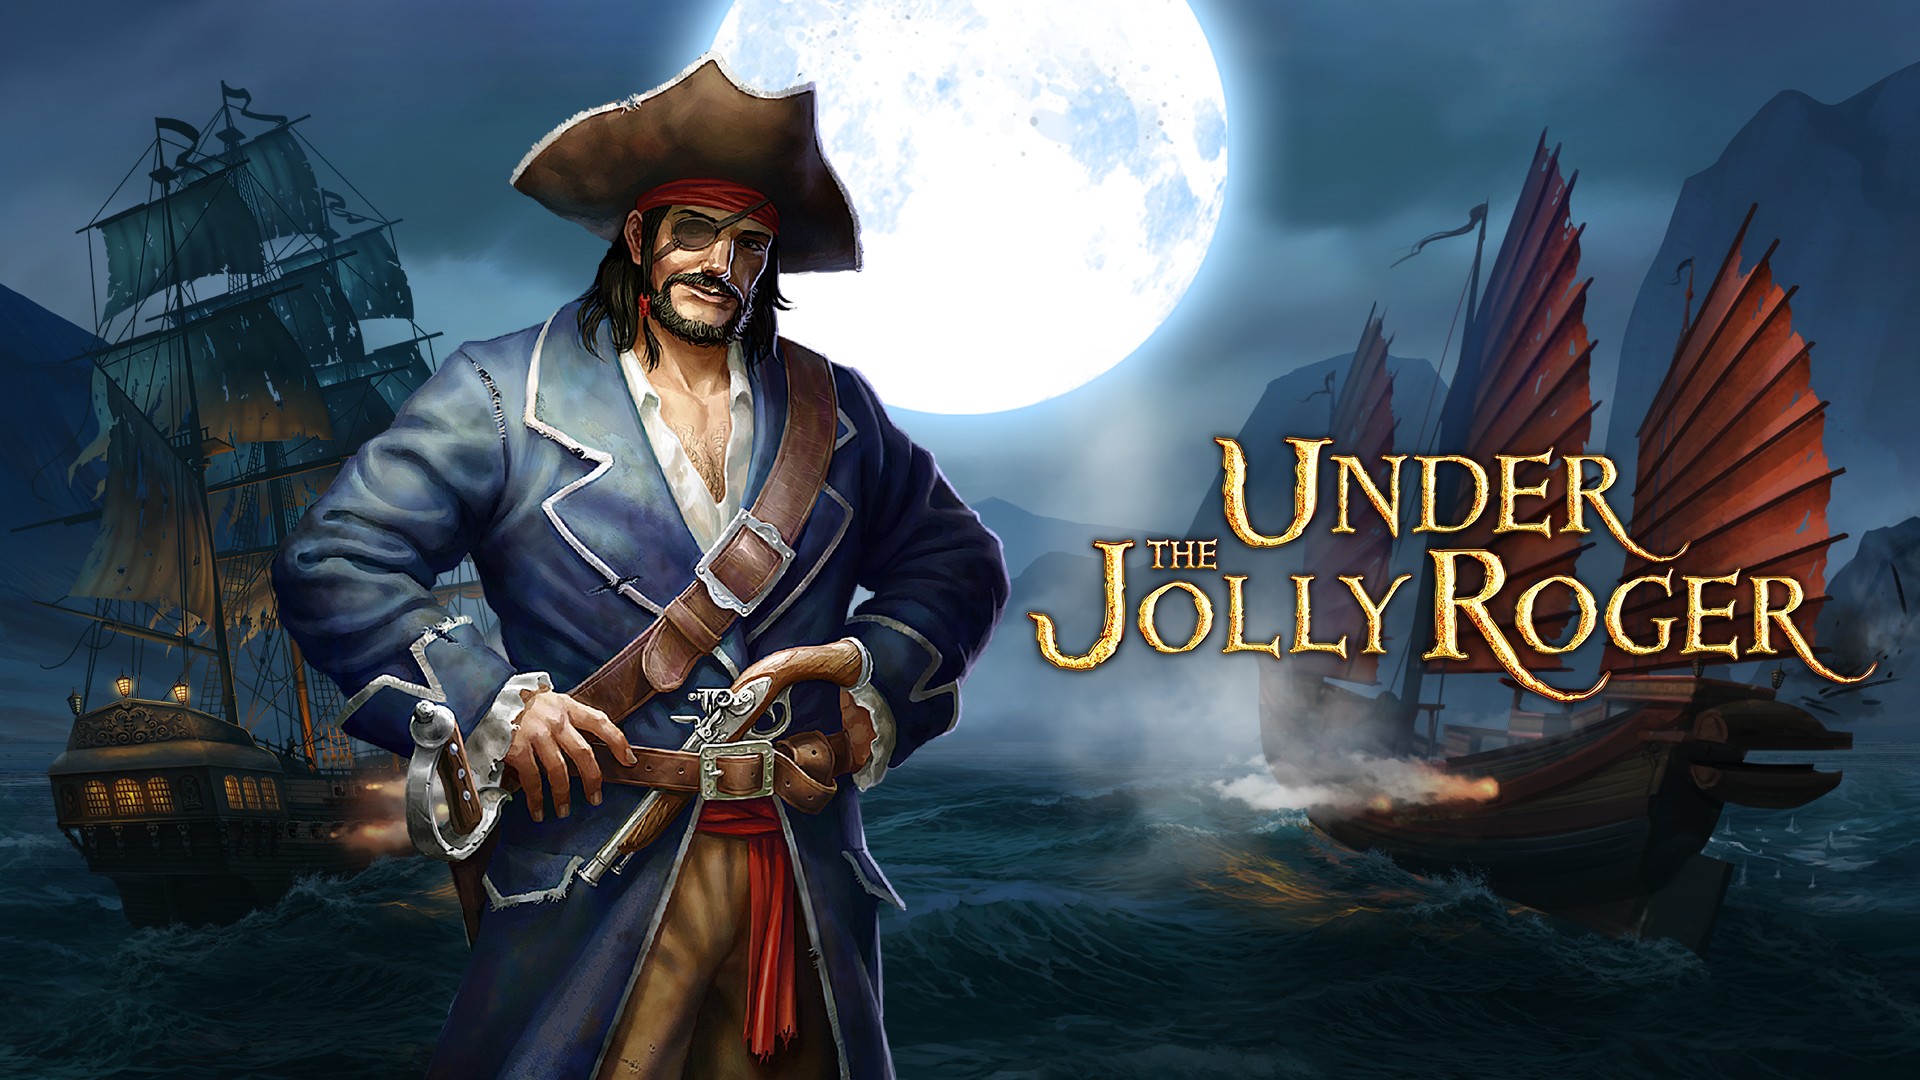 Video For Prepare to Sail the Seas in Pirate Action RPG Under the Jolly Roger